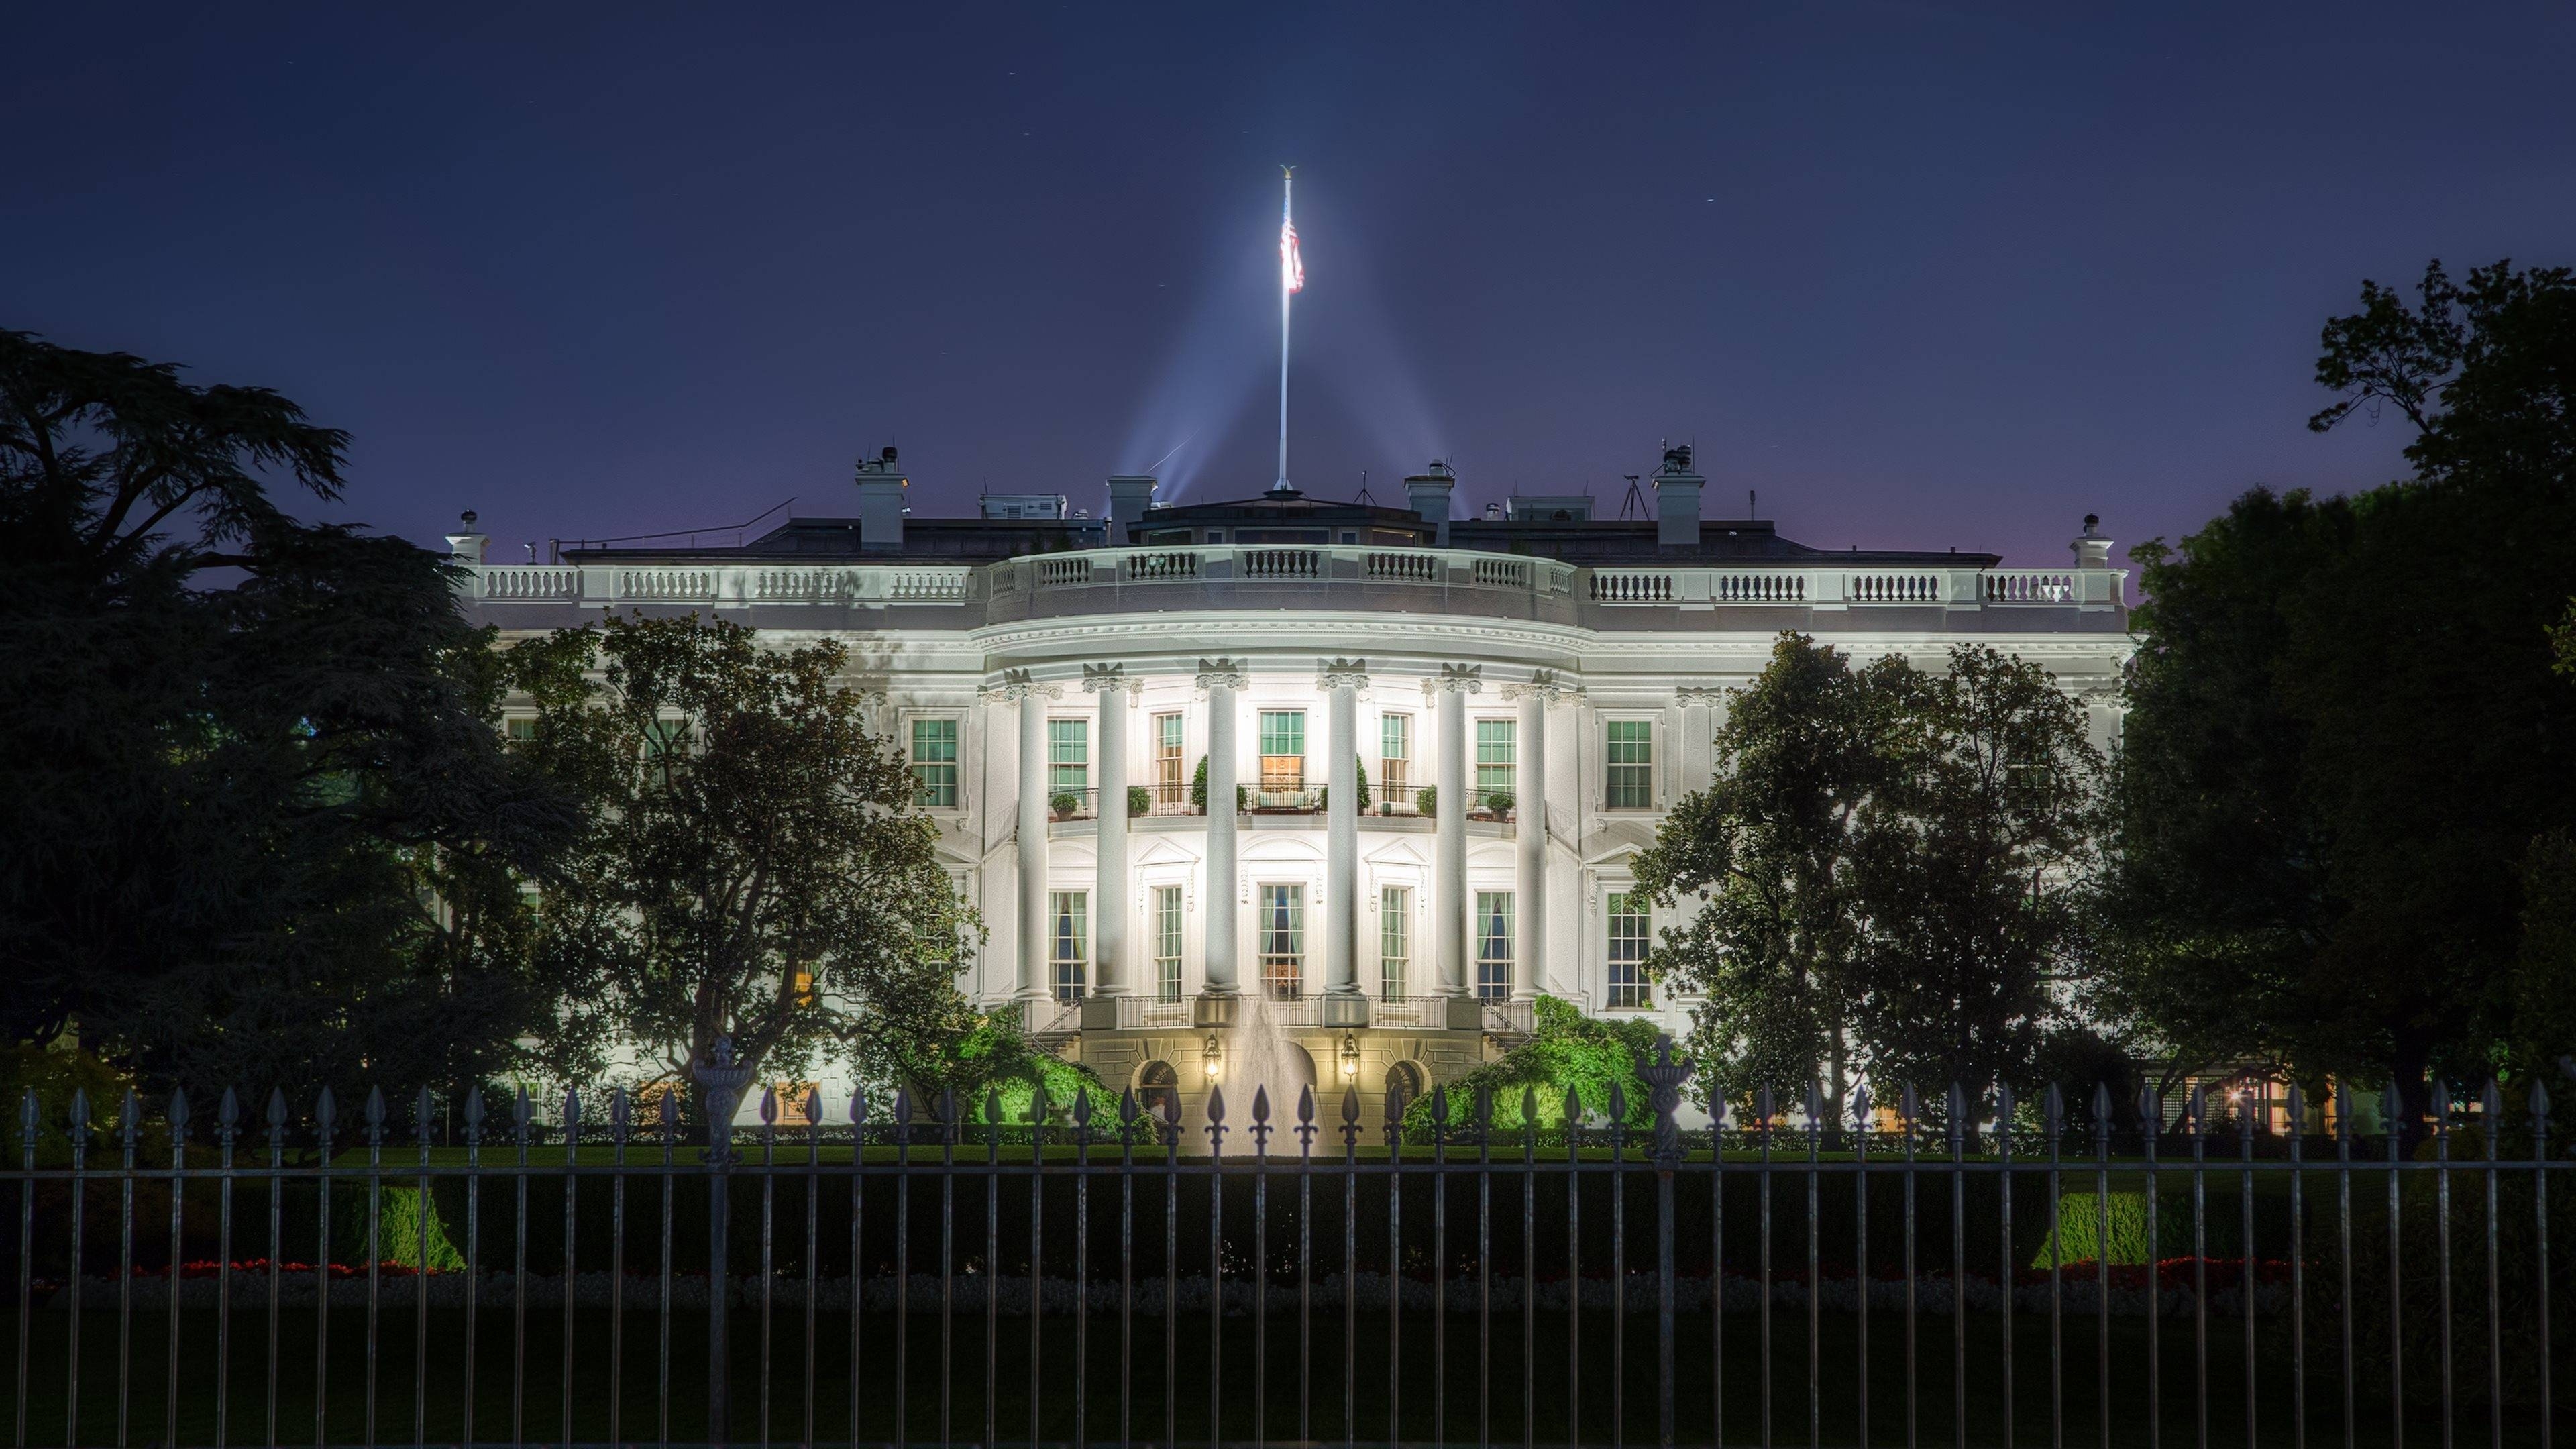 10 Top The White House Wallpaper FULL HD 1920×1080 For PC Background